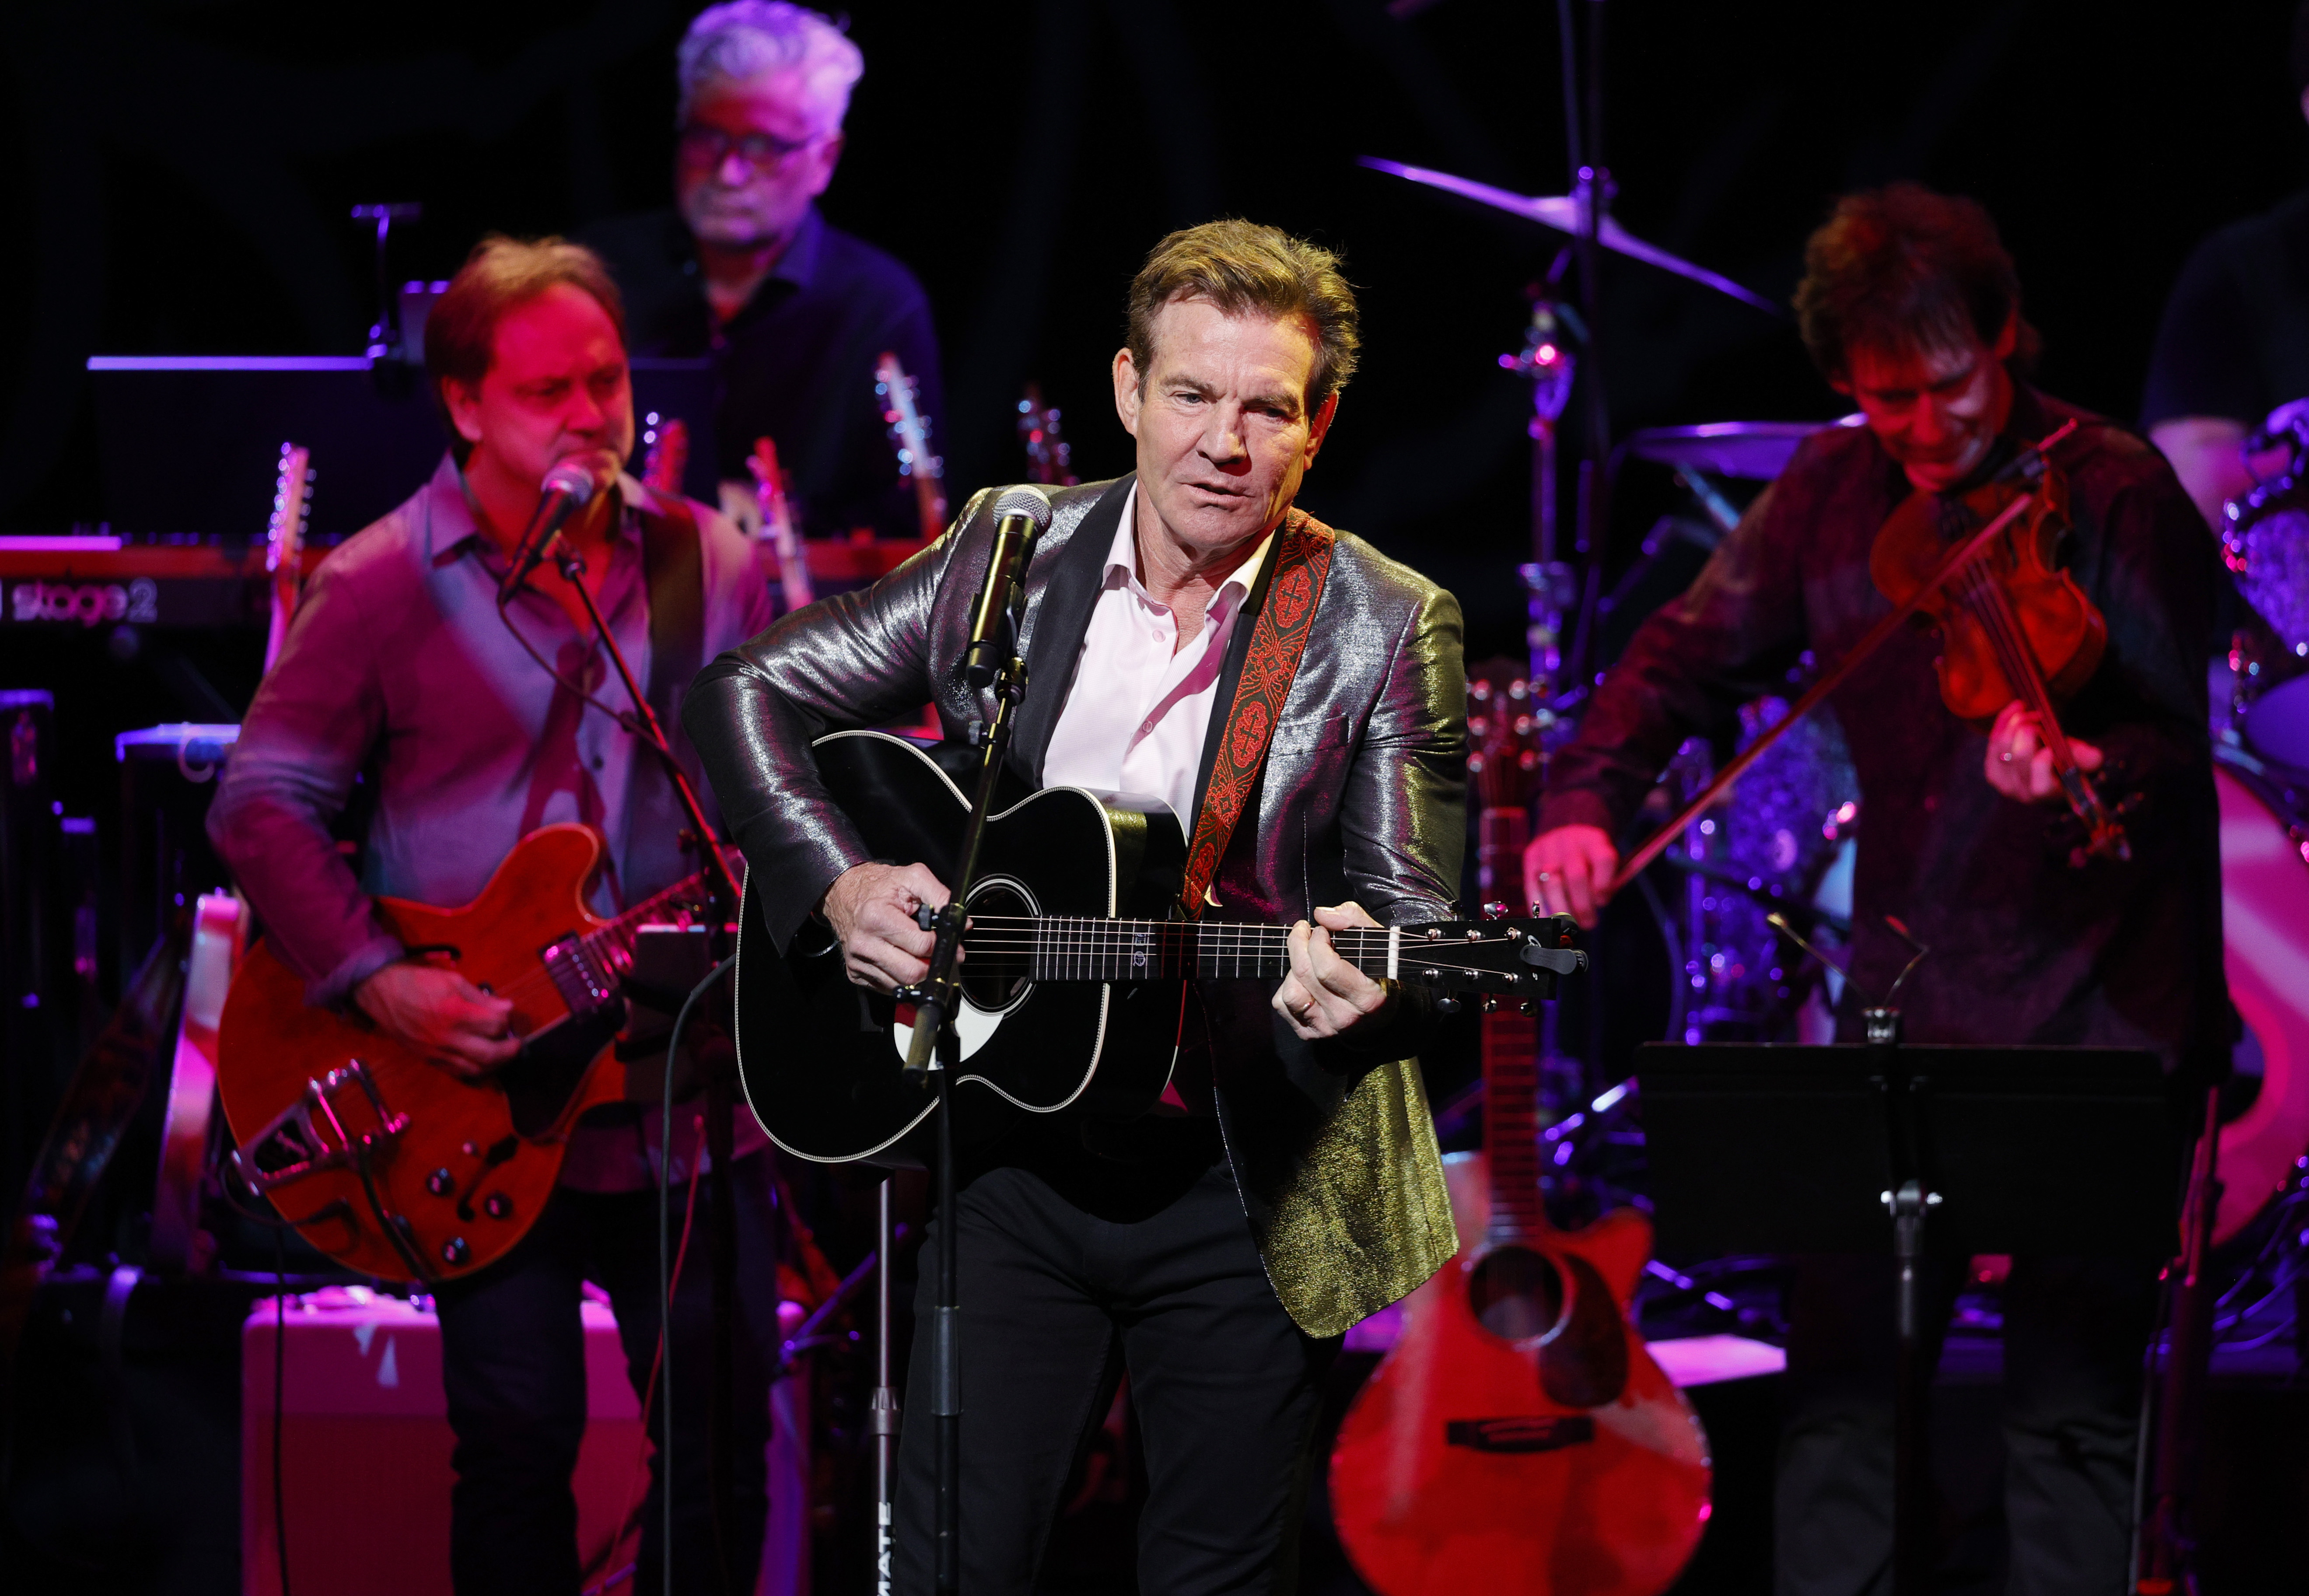    Dennis Quaid performs a at the Country Music Hall of Fame and Museum on Oct. 24, 2021 in Nashville, Tennessee. Quaid brings his solo evening of music to City Winery Chicago on Nov. 10.  